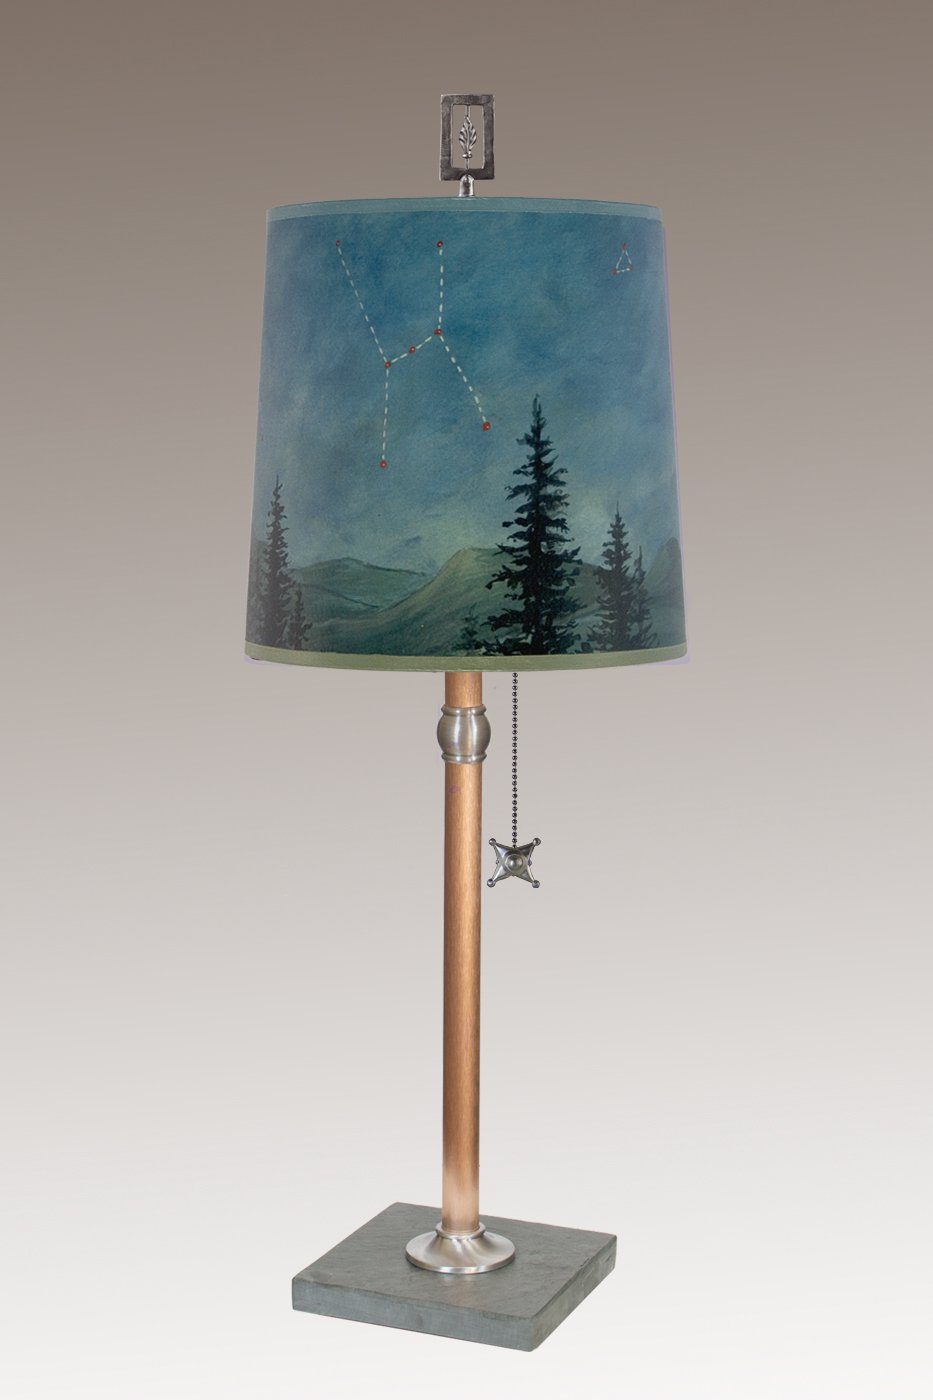 Janna Ugone & Co Table Lamps Copper Table Lamp with Medium Drum Shade in Midnight Sky